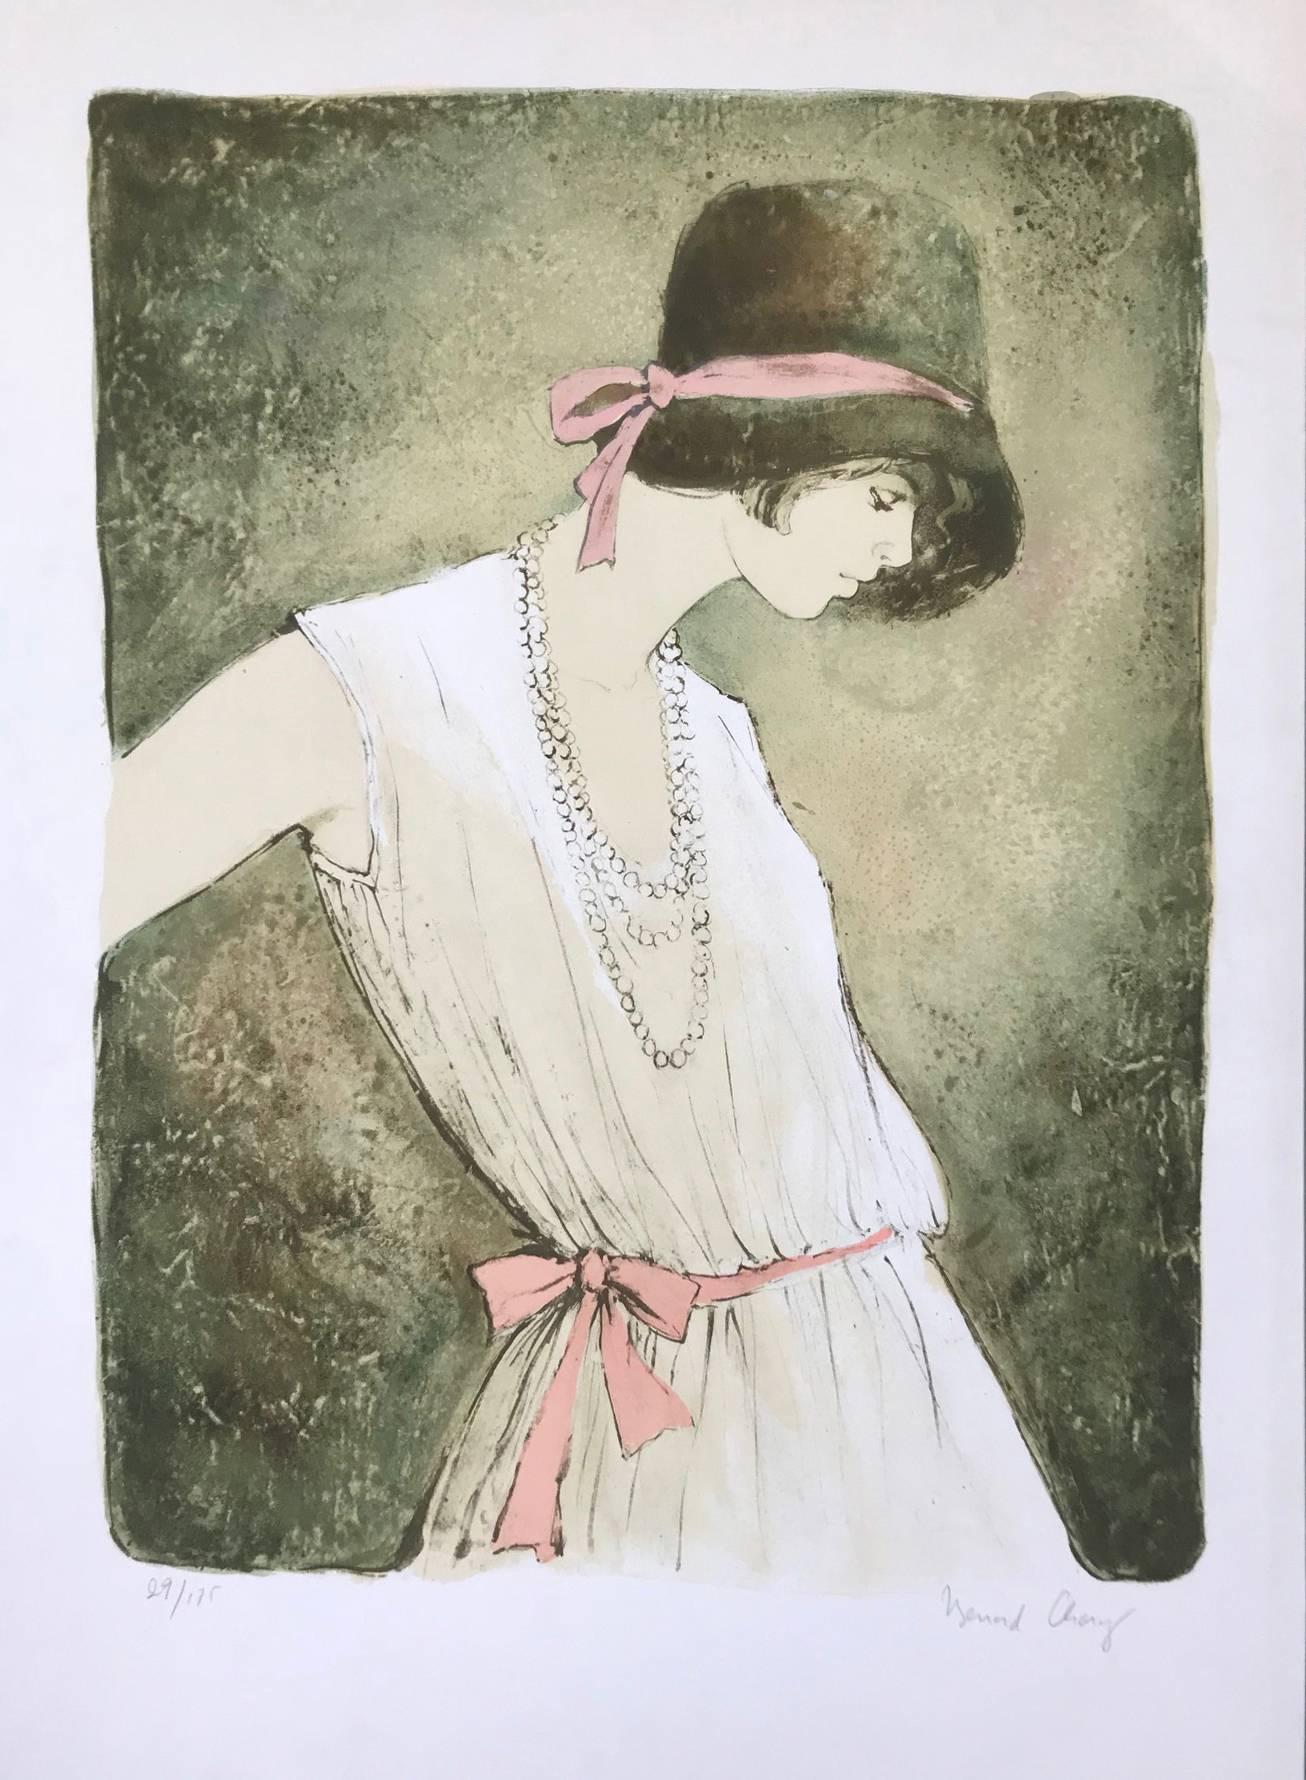 Girl with Pearls (Edition 29/175) - Print by Bernard Charoy